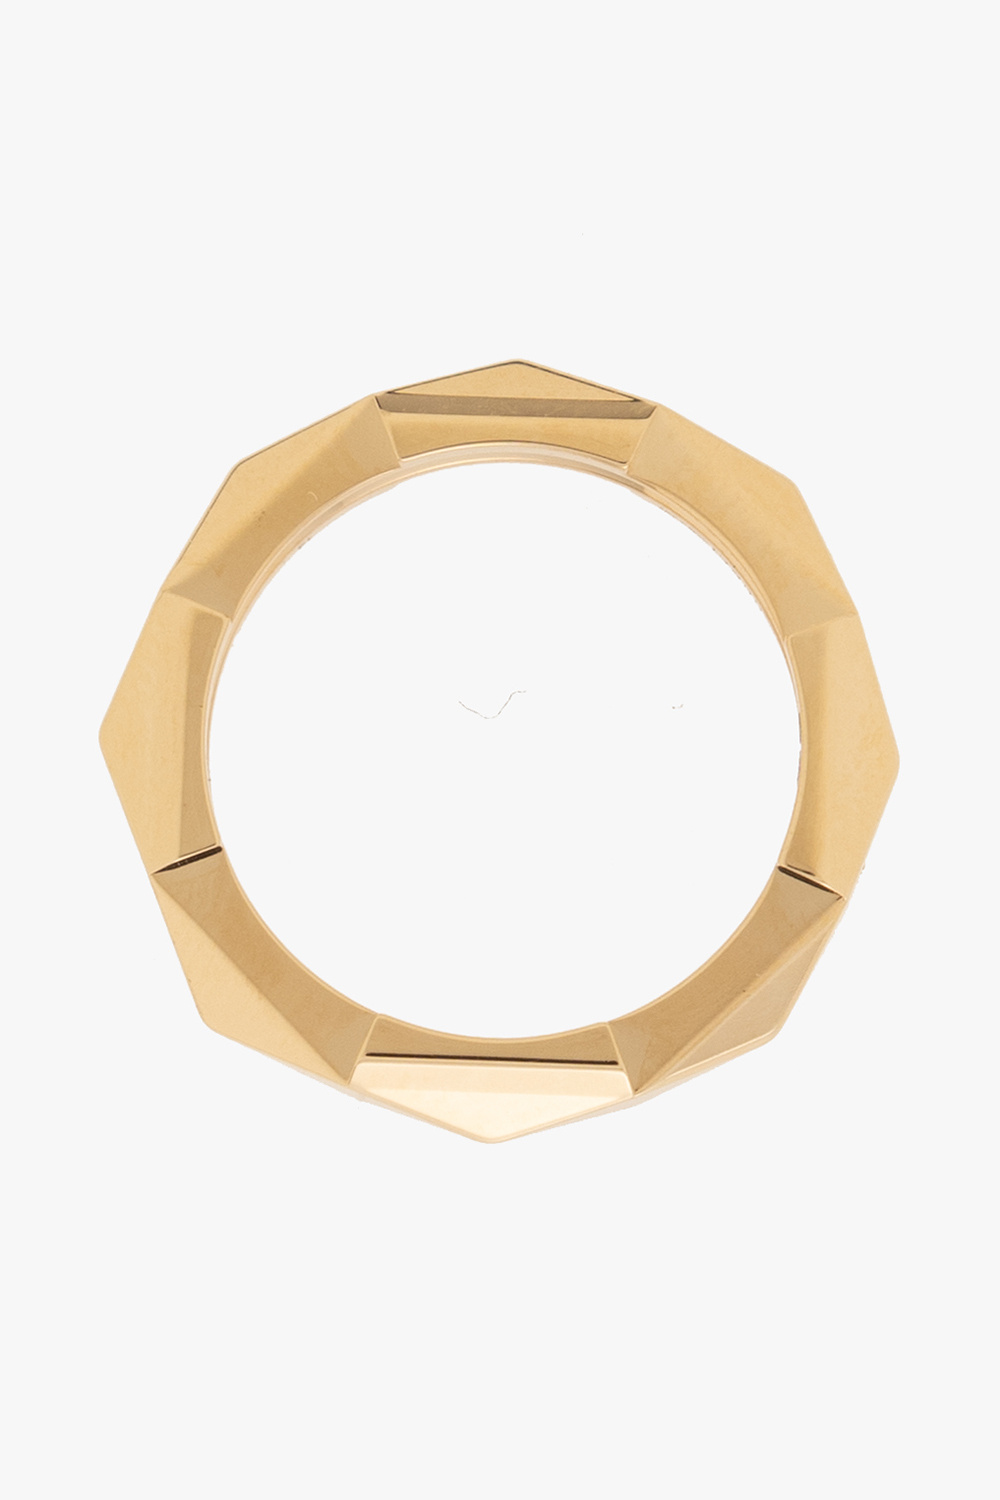 Gucci Yellow gold ring